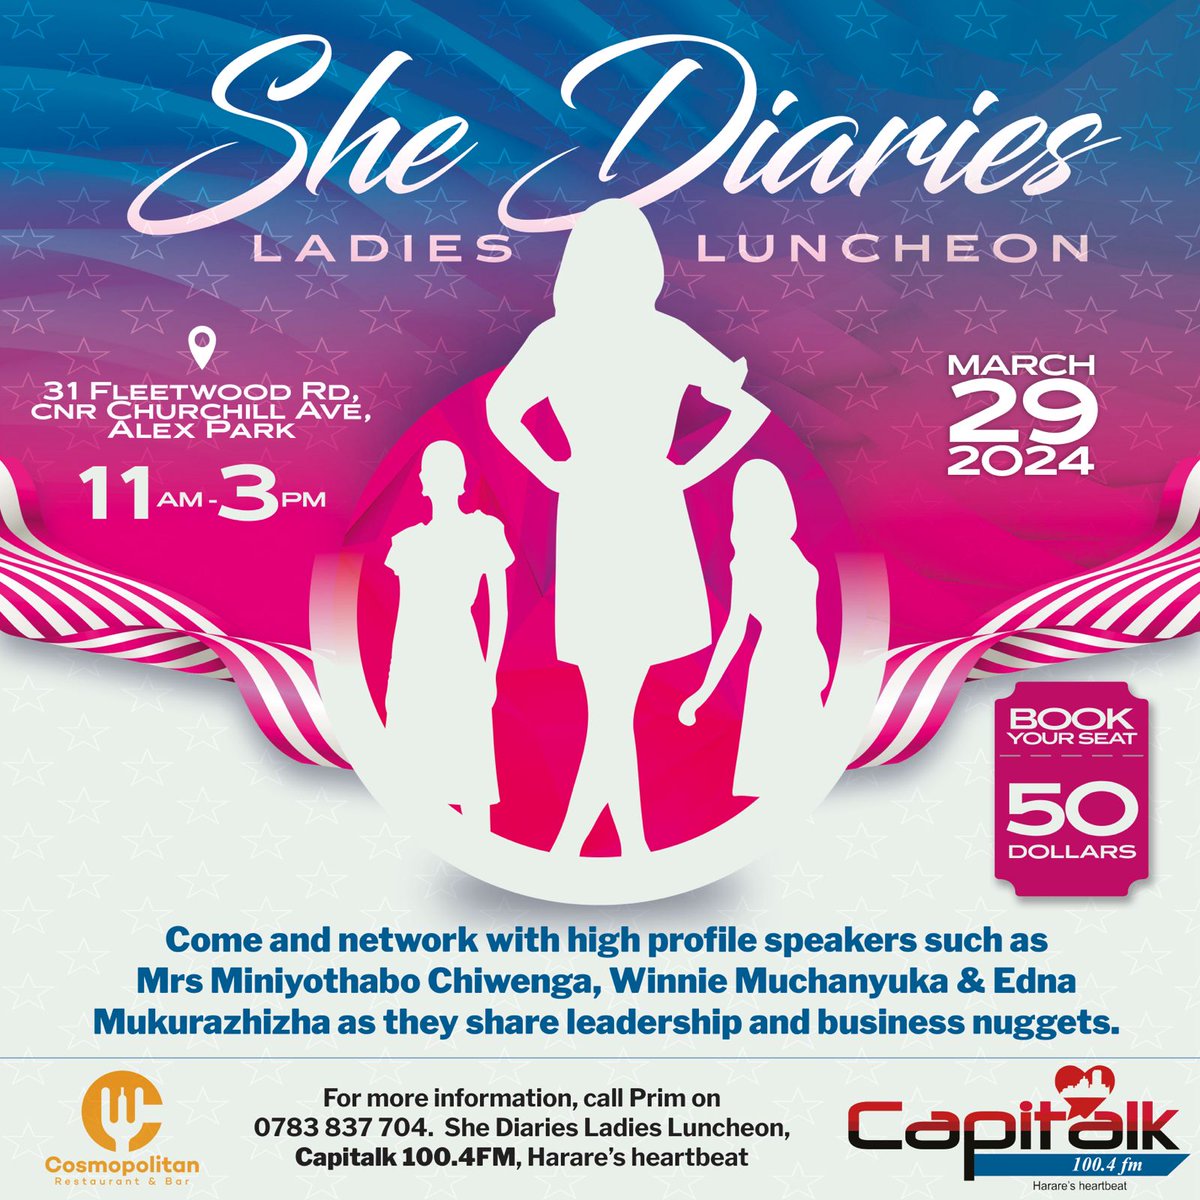 Capitalk100.4fm celebrates International Women's Day at the She Diaries Ladies Luncheon on March 29 at Cosmopolitan Restaurant, ,number 31 Fleetwood Rd, cnr Churchill Ave, Alex Park, from 11am to 3pm.  Book your seat for $50.  For more information, call Prim on 0783 837 704.